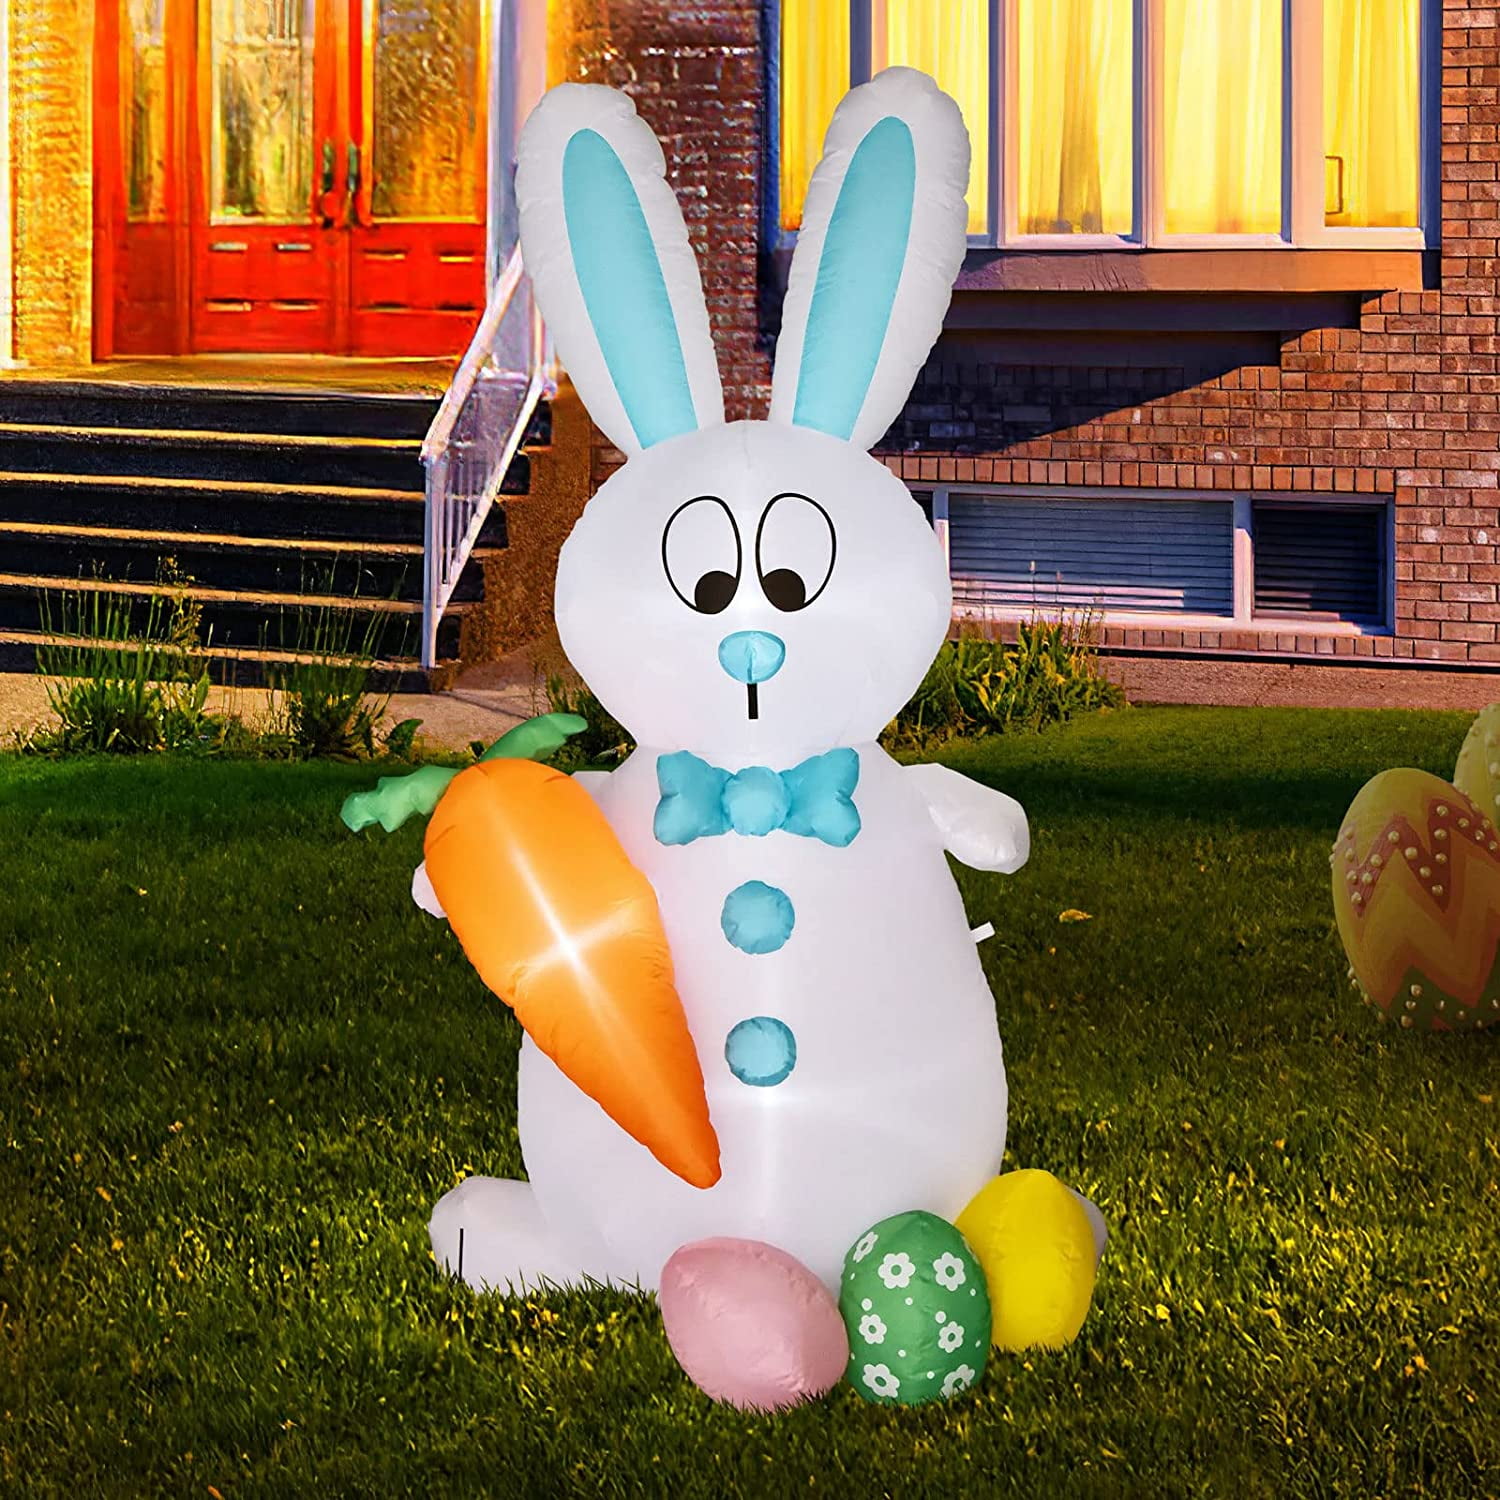 Easter Airblown Inflatable Outdoor Seasonal Figure Lighted Yard Lawn Decor Prop 